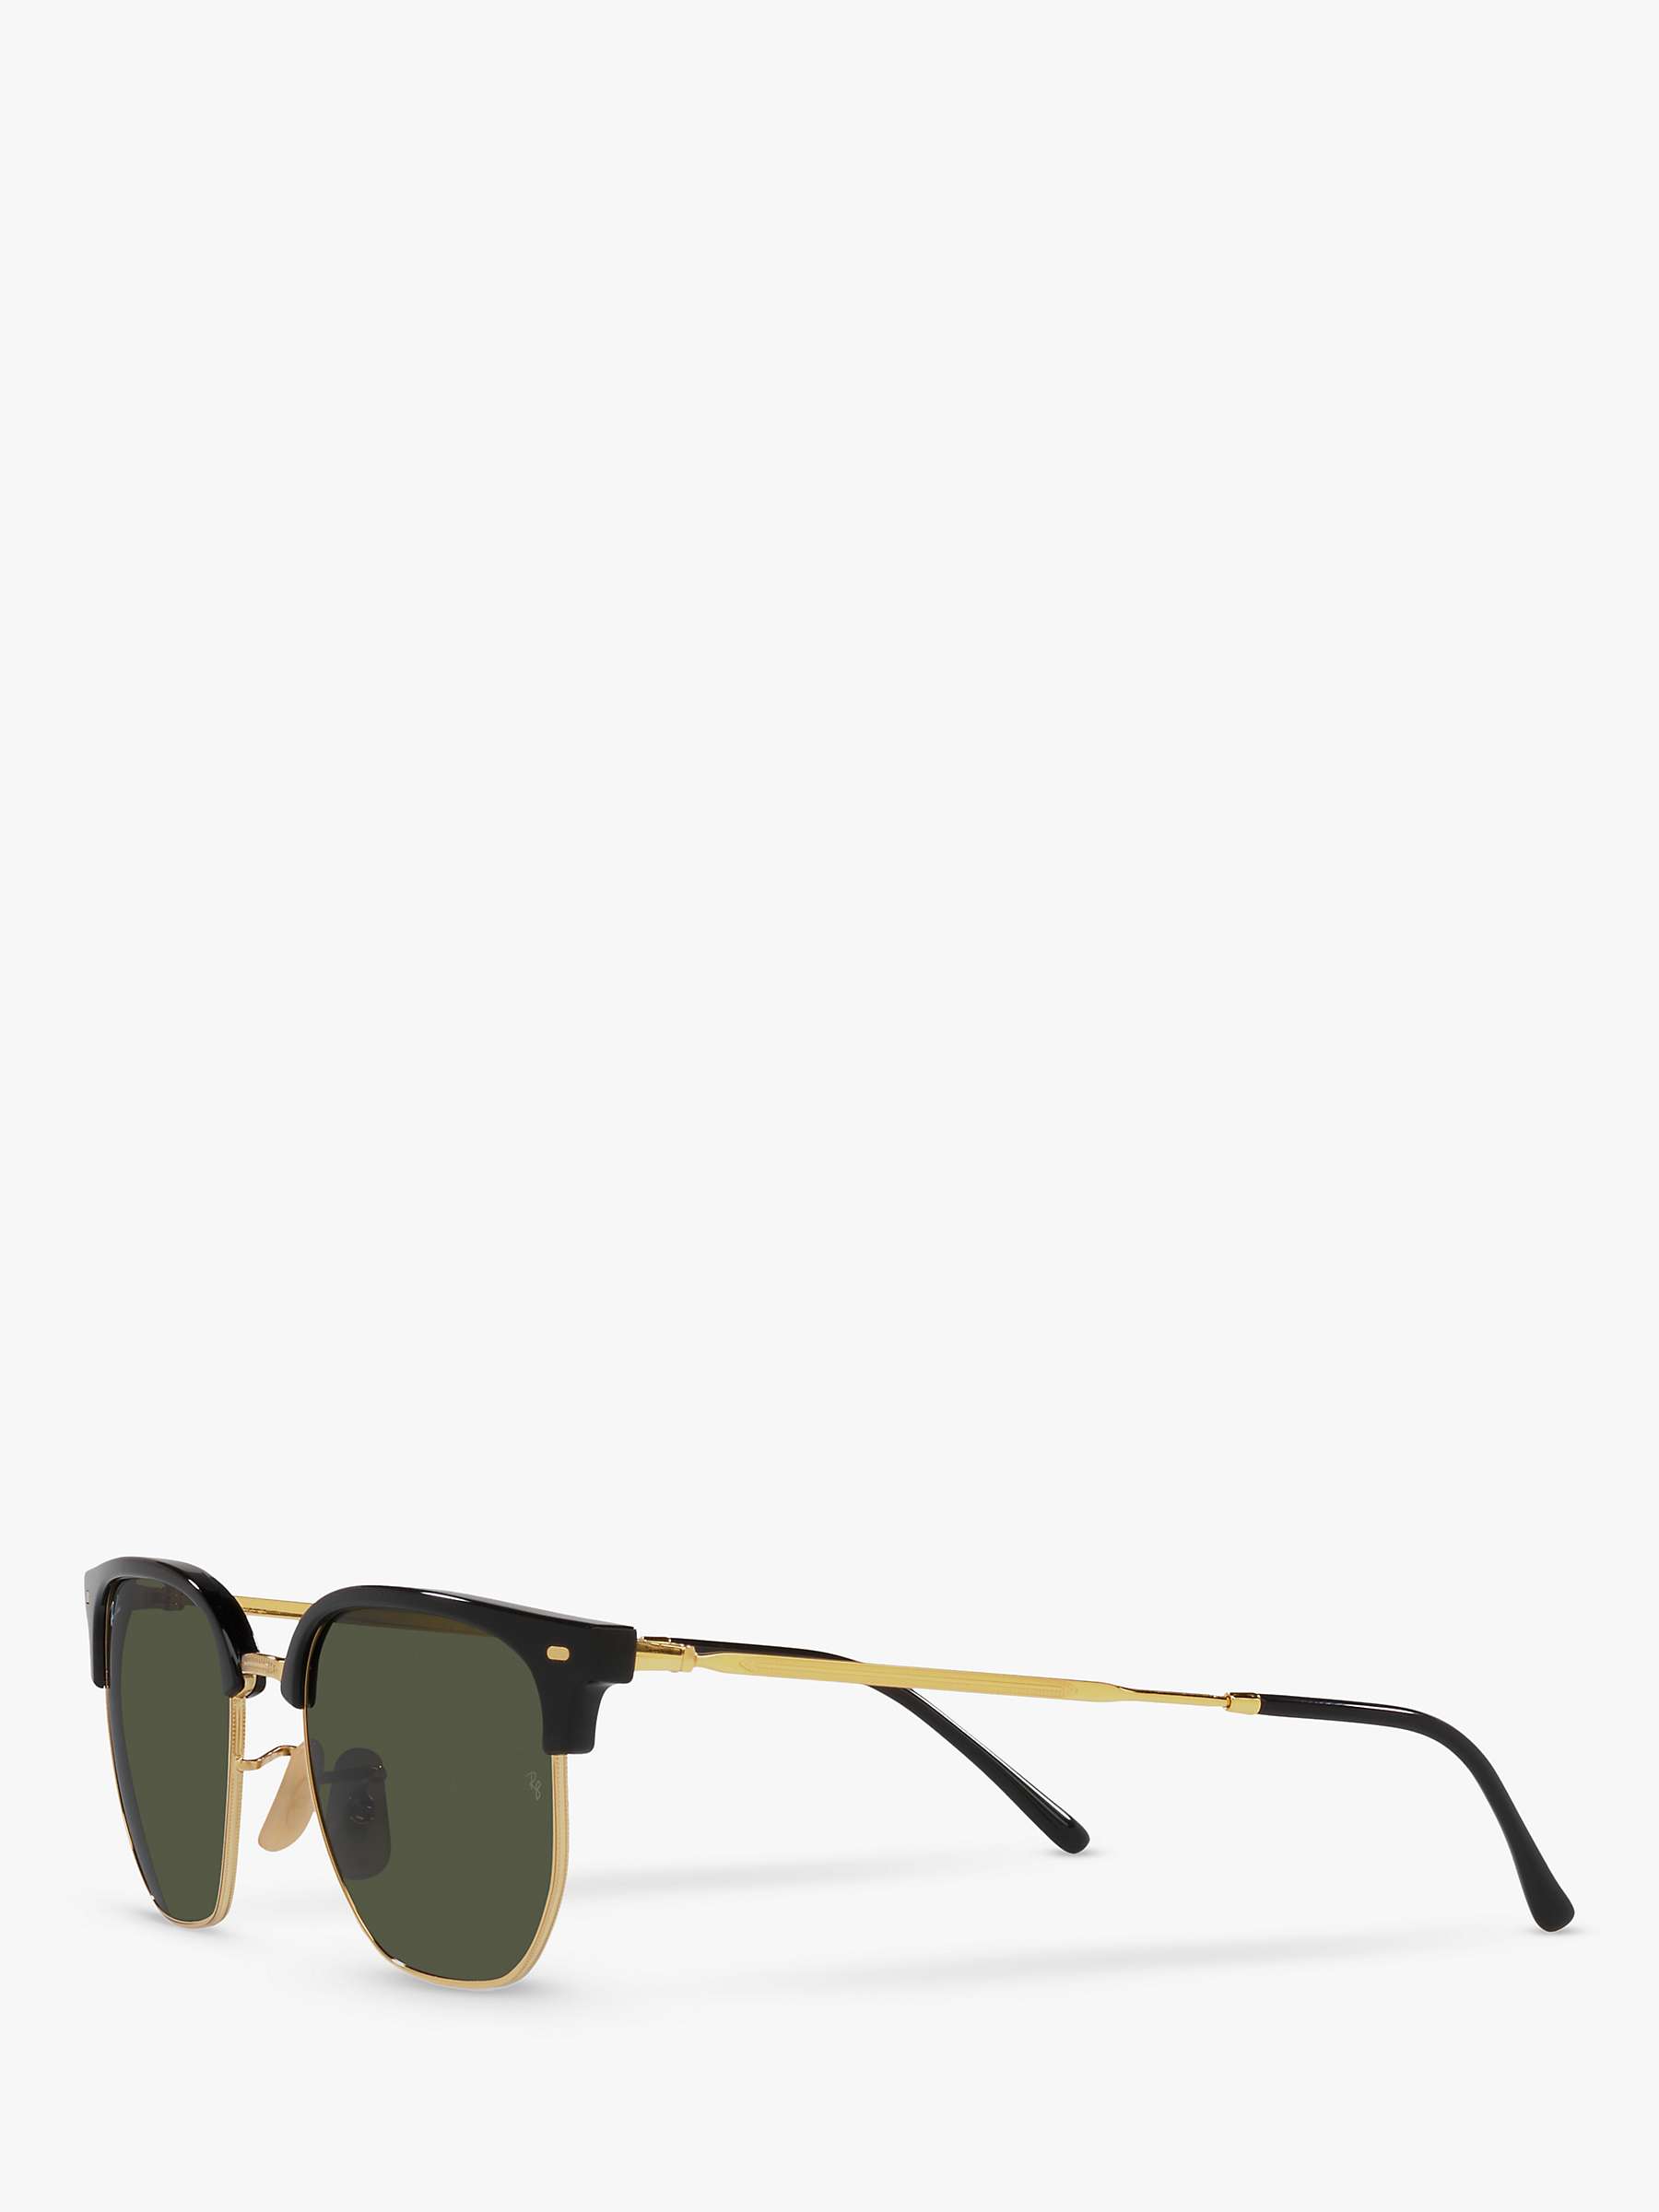 Buy Ray-Ban RB4416 Unisex New Clubmaster Sunglasses, Black/Gold Online at johnlewis.com